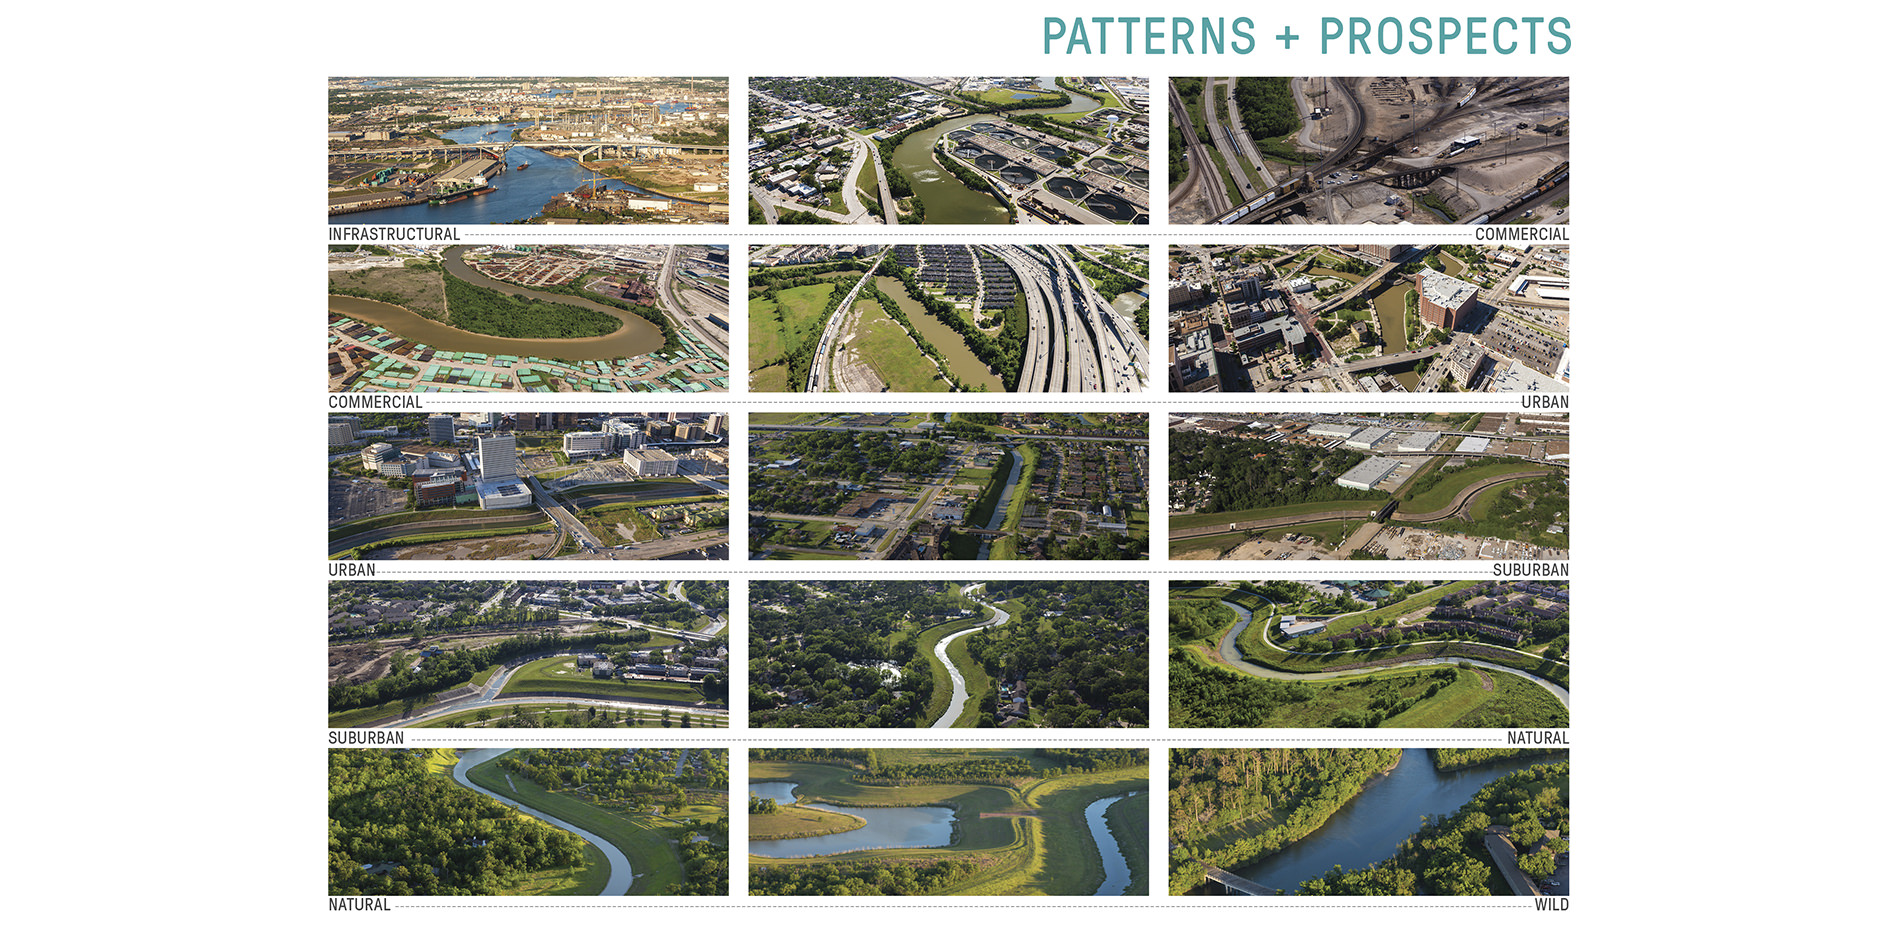 Patterns and Prospects Images